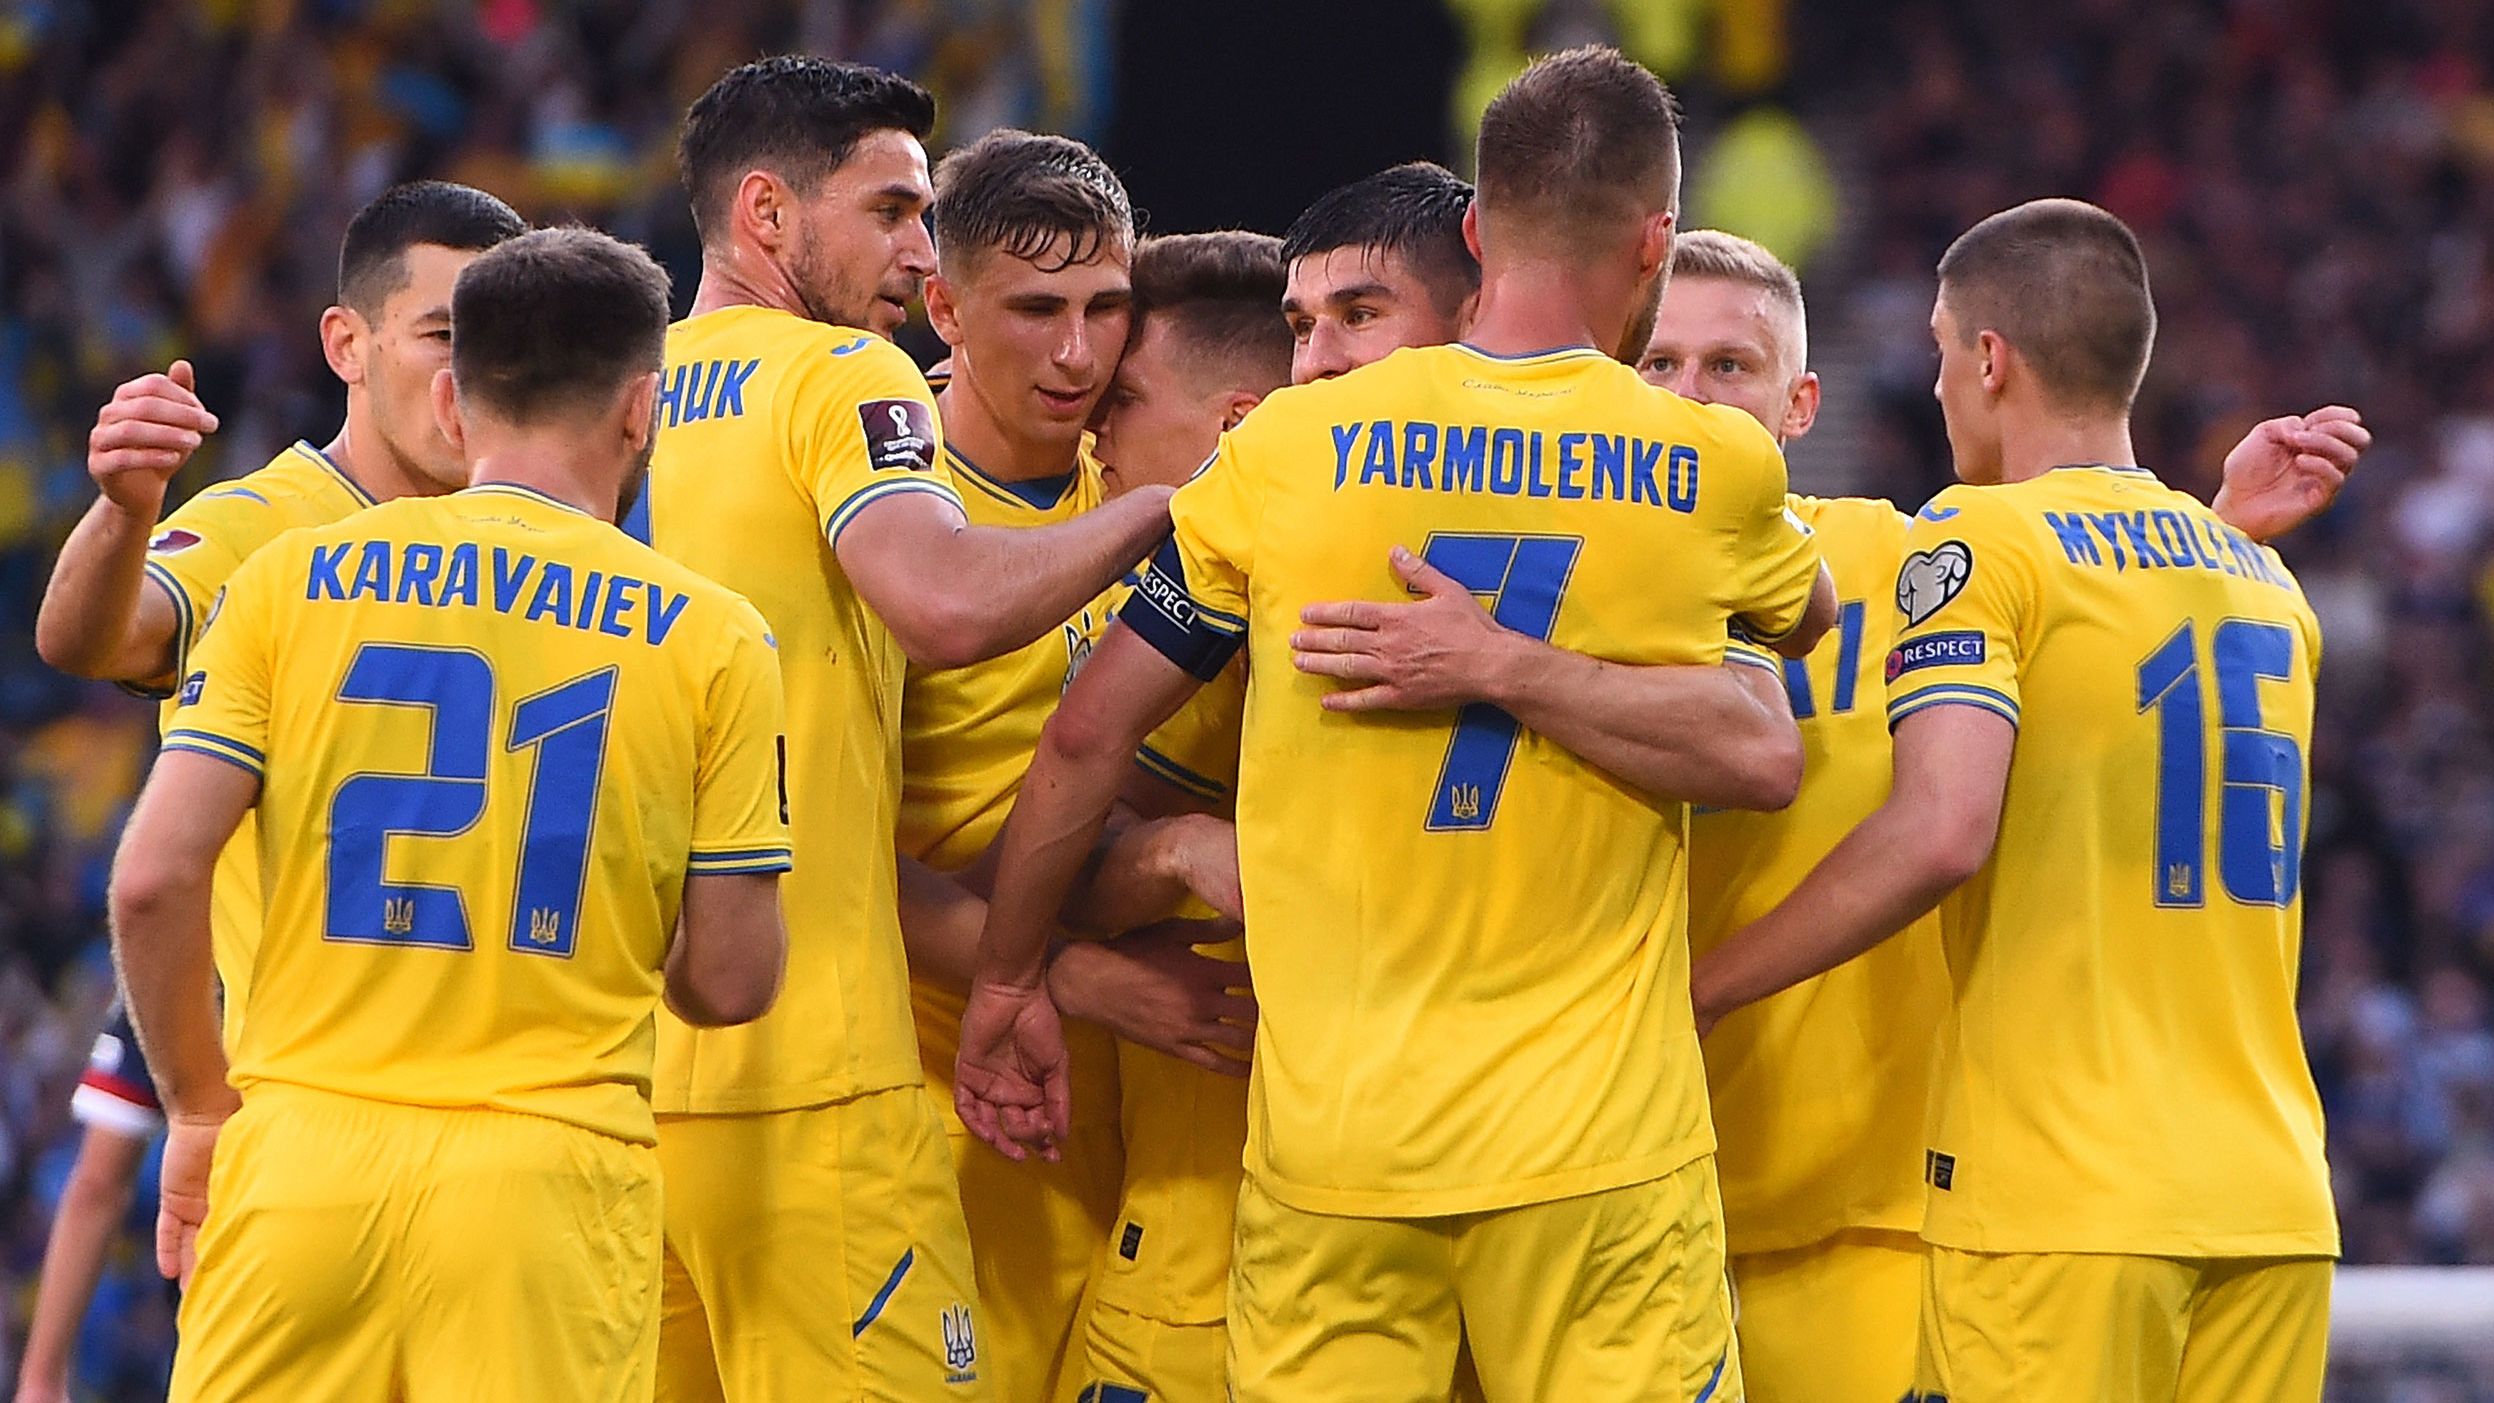 Yarmolenko is mobbed by teammates after scoring the opener. 